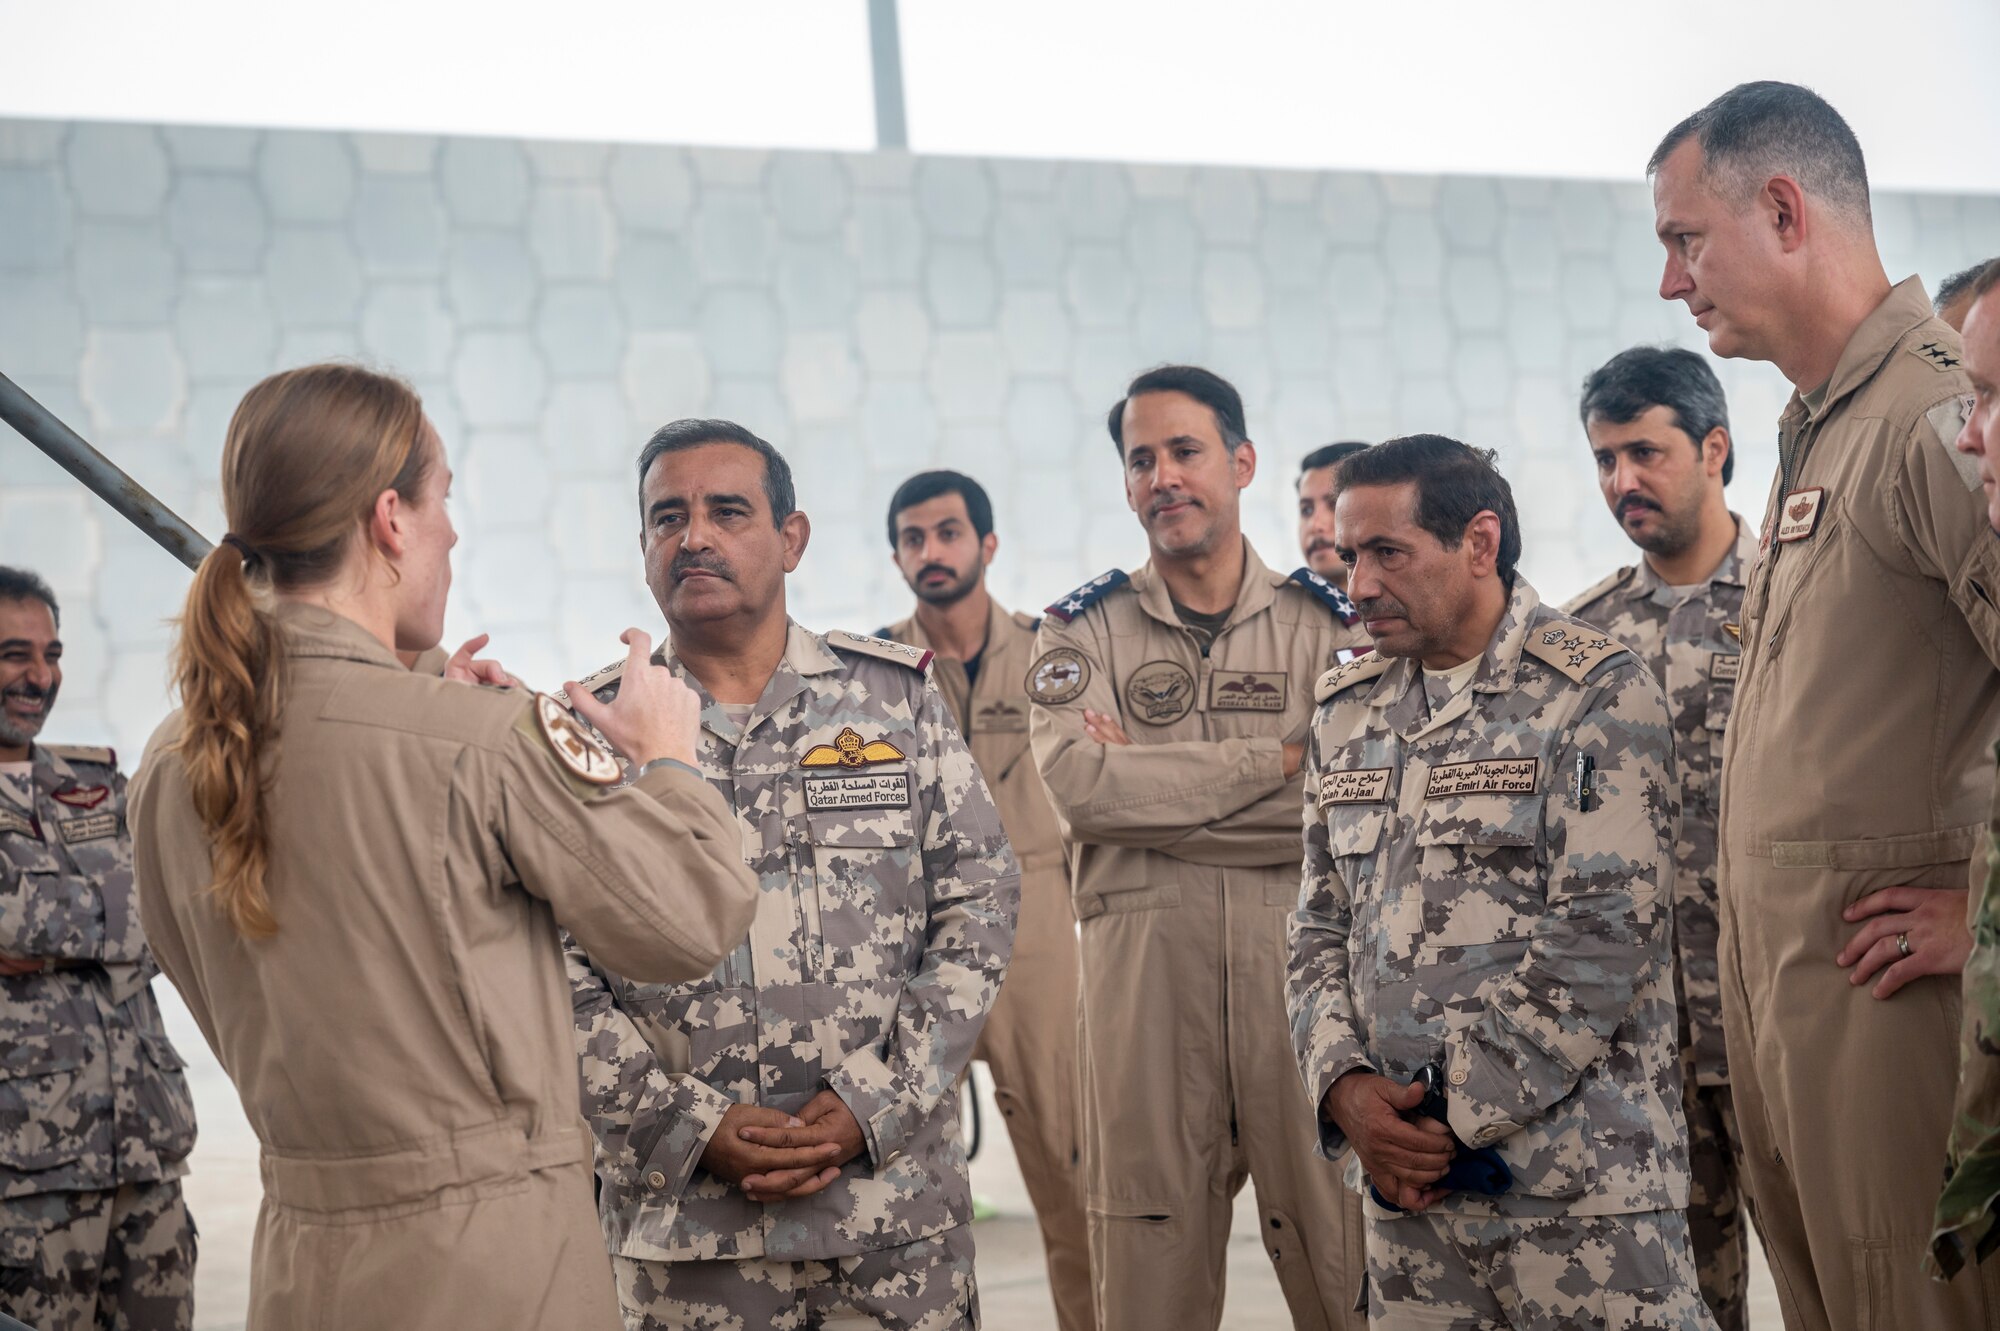 Group of military members talk to each other in front of an F-35